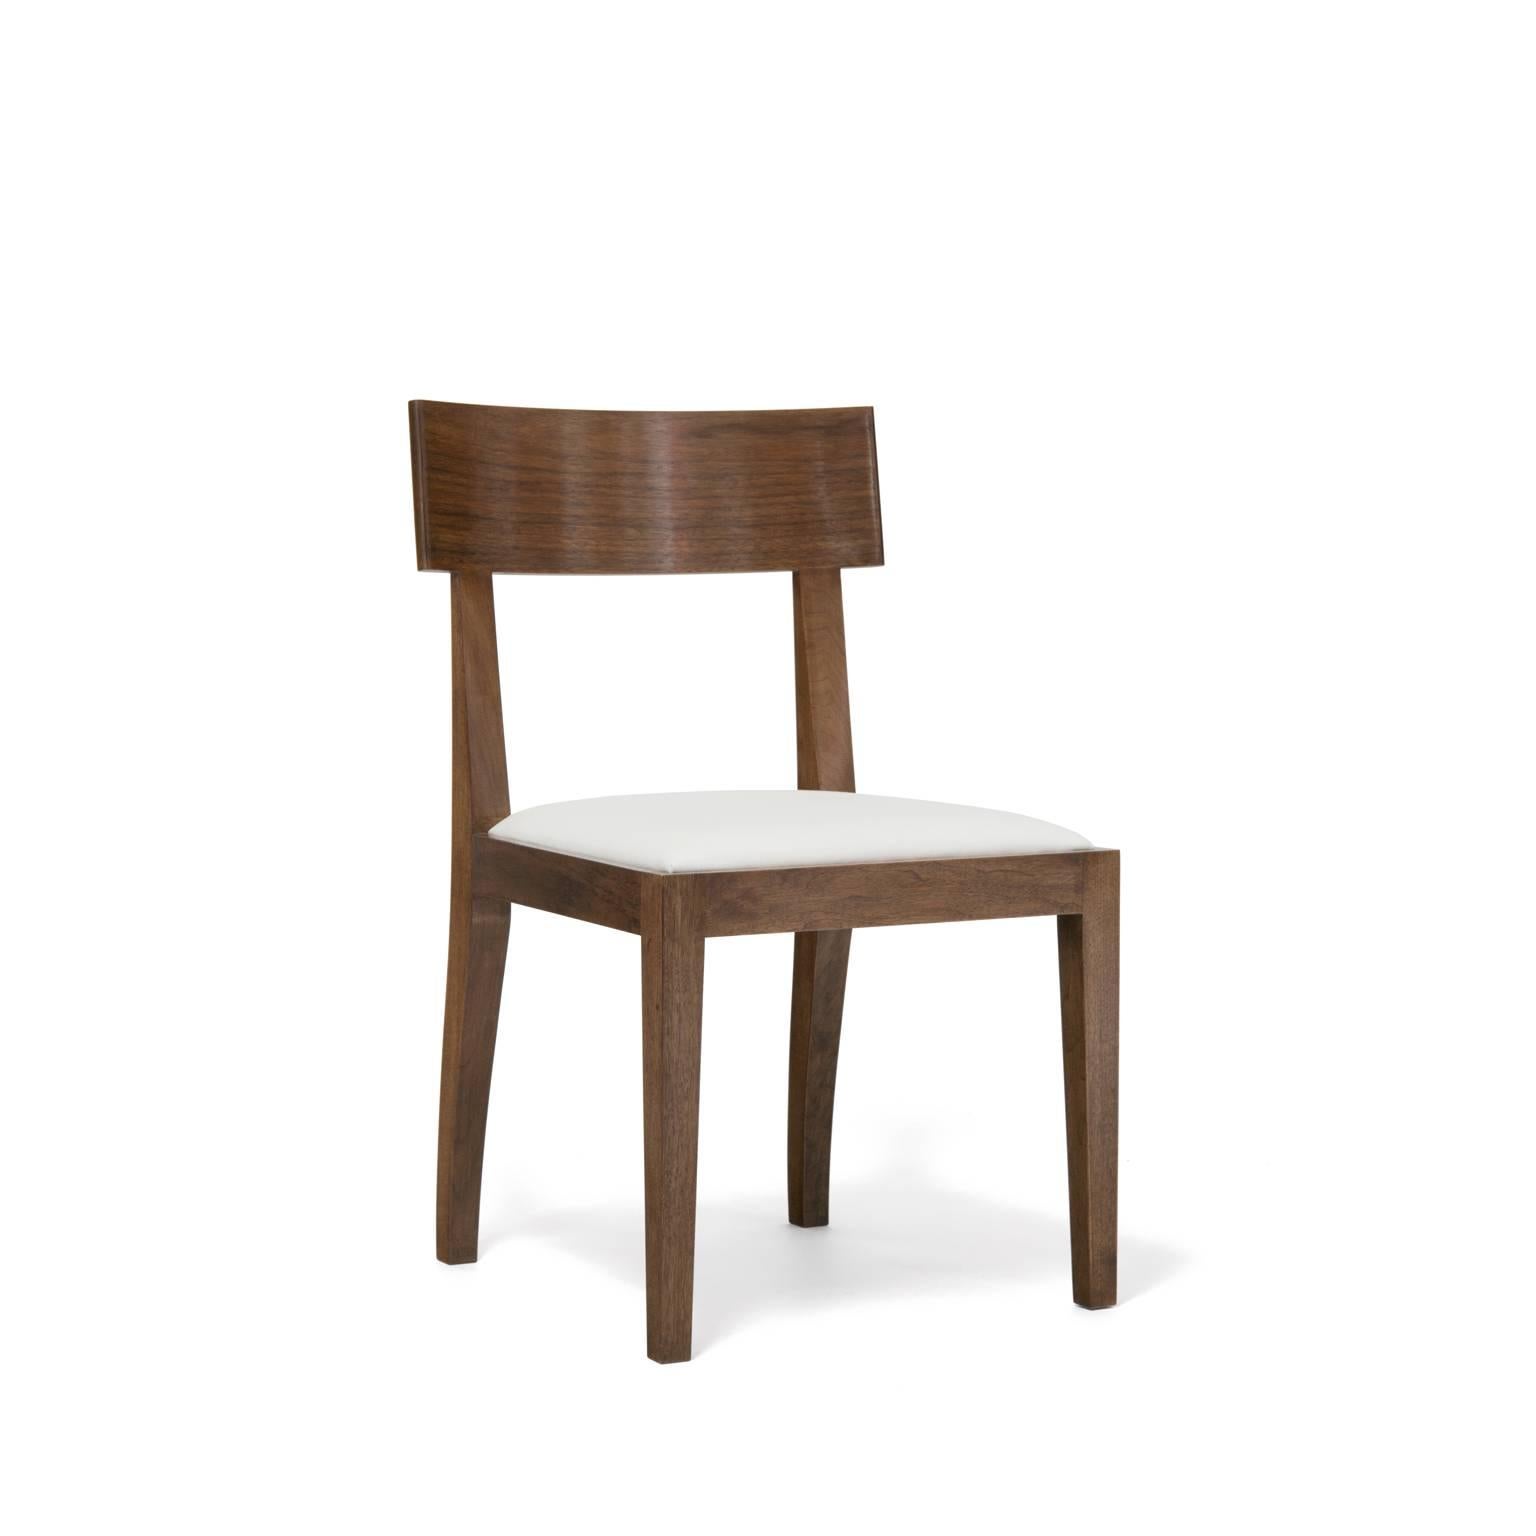 Atelier Demiurge Collection Bac Chair shown in walnut with provence finish. Inquire for finish and customization options. COM 1 yards.

Atelier Demiurge Collection pieces are made to order, and custom sizes are available. Please contact the gallery